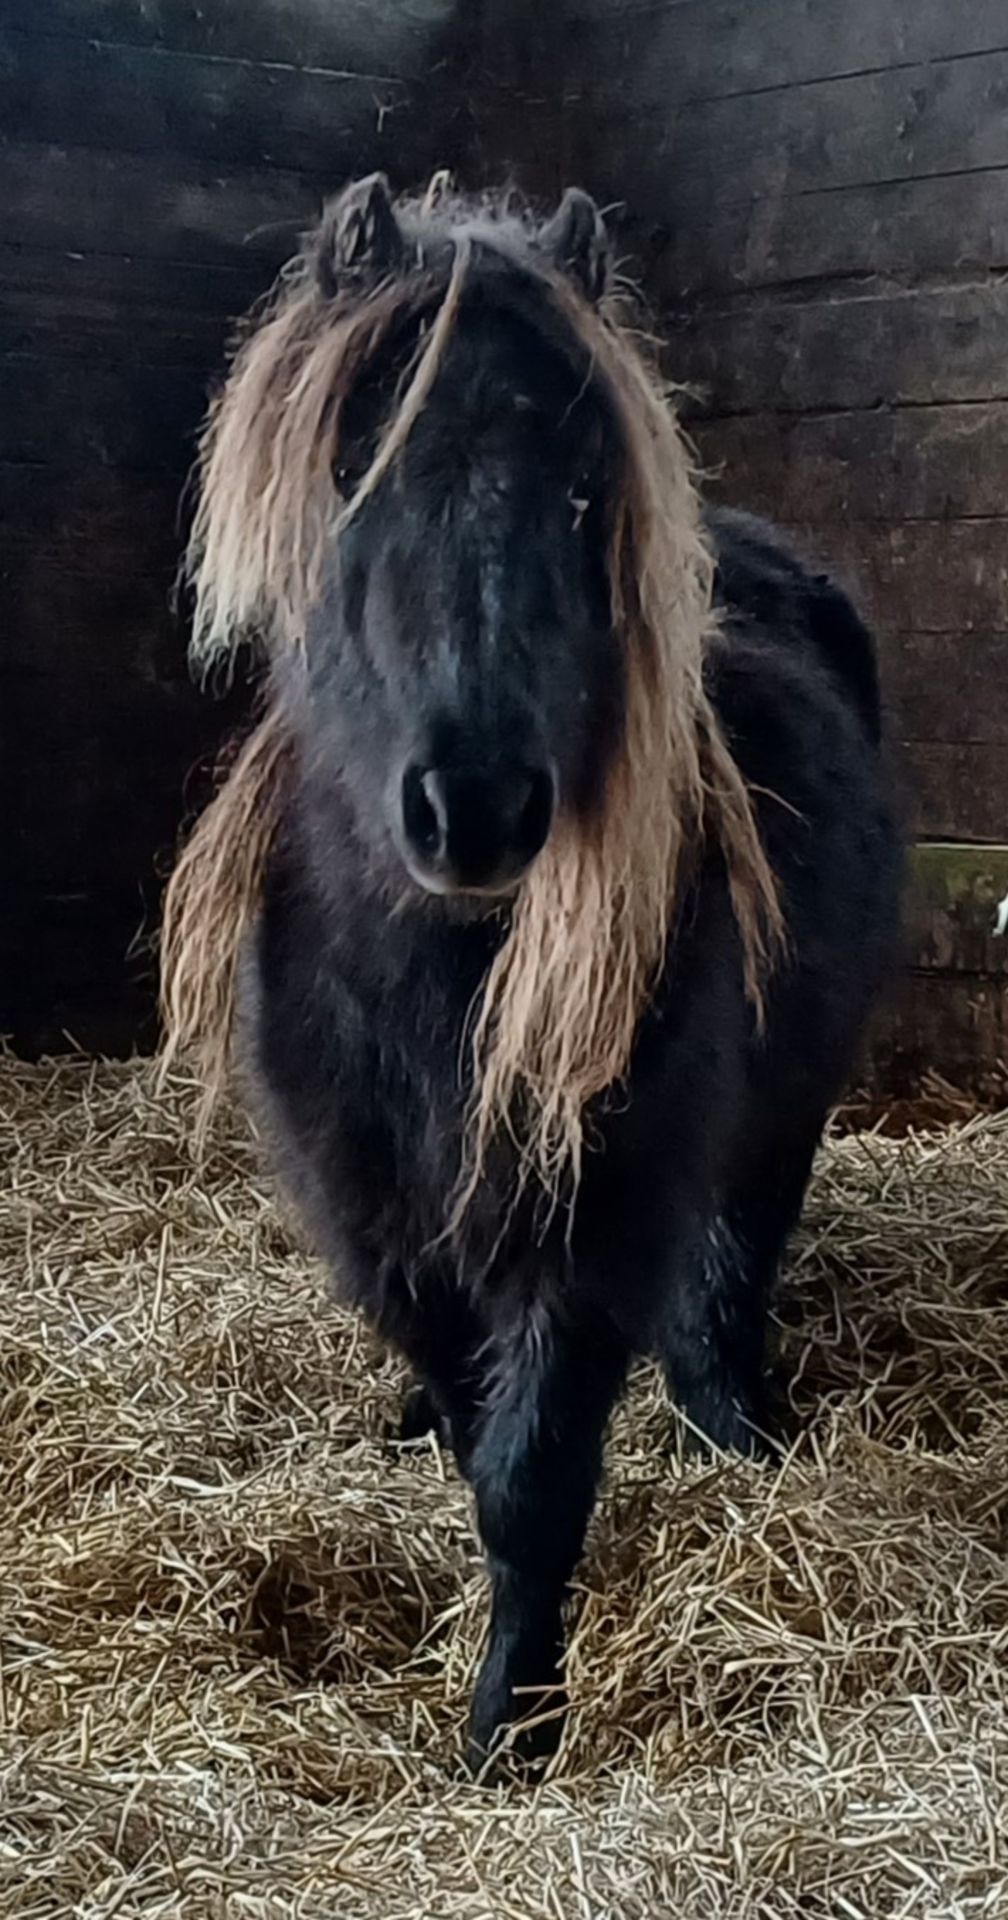 'VIXEN LILLIBET' SHETLAND BLACK MARE BELIEVED TO BE 10 YEARS + - Image 9 of 13